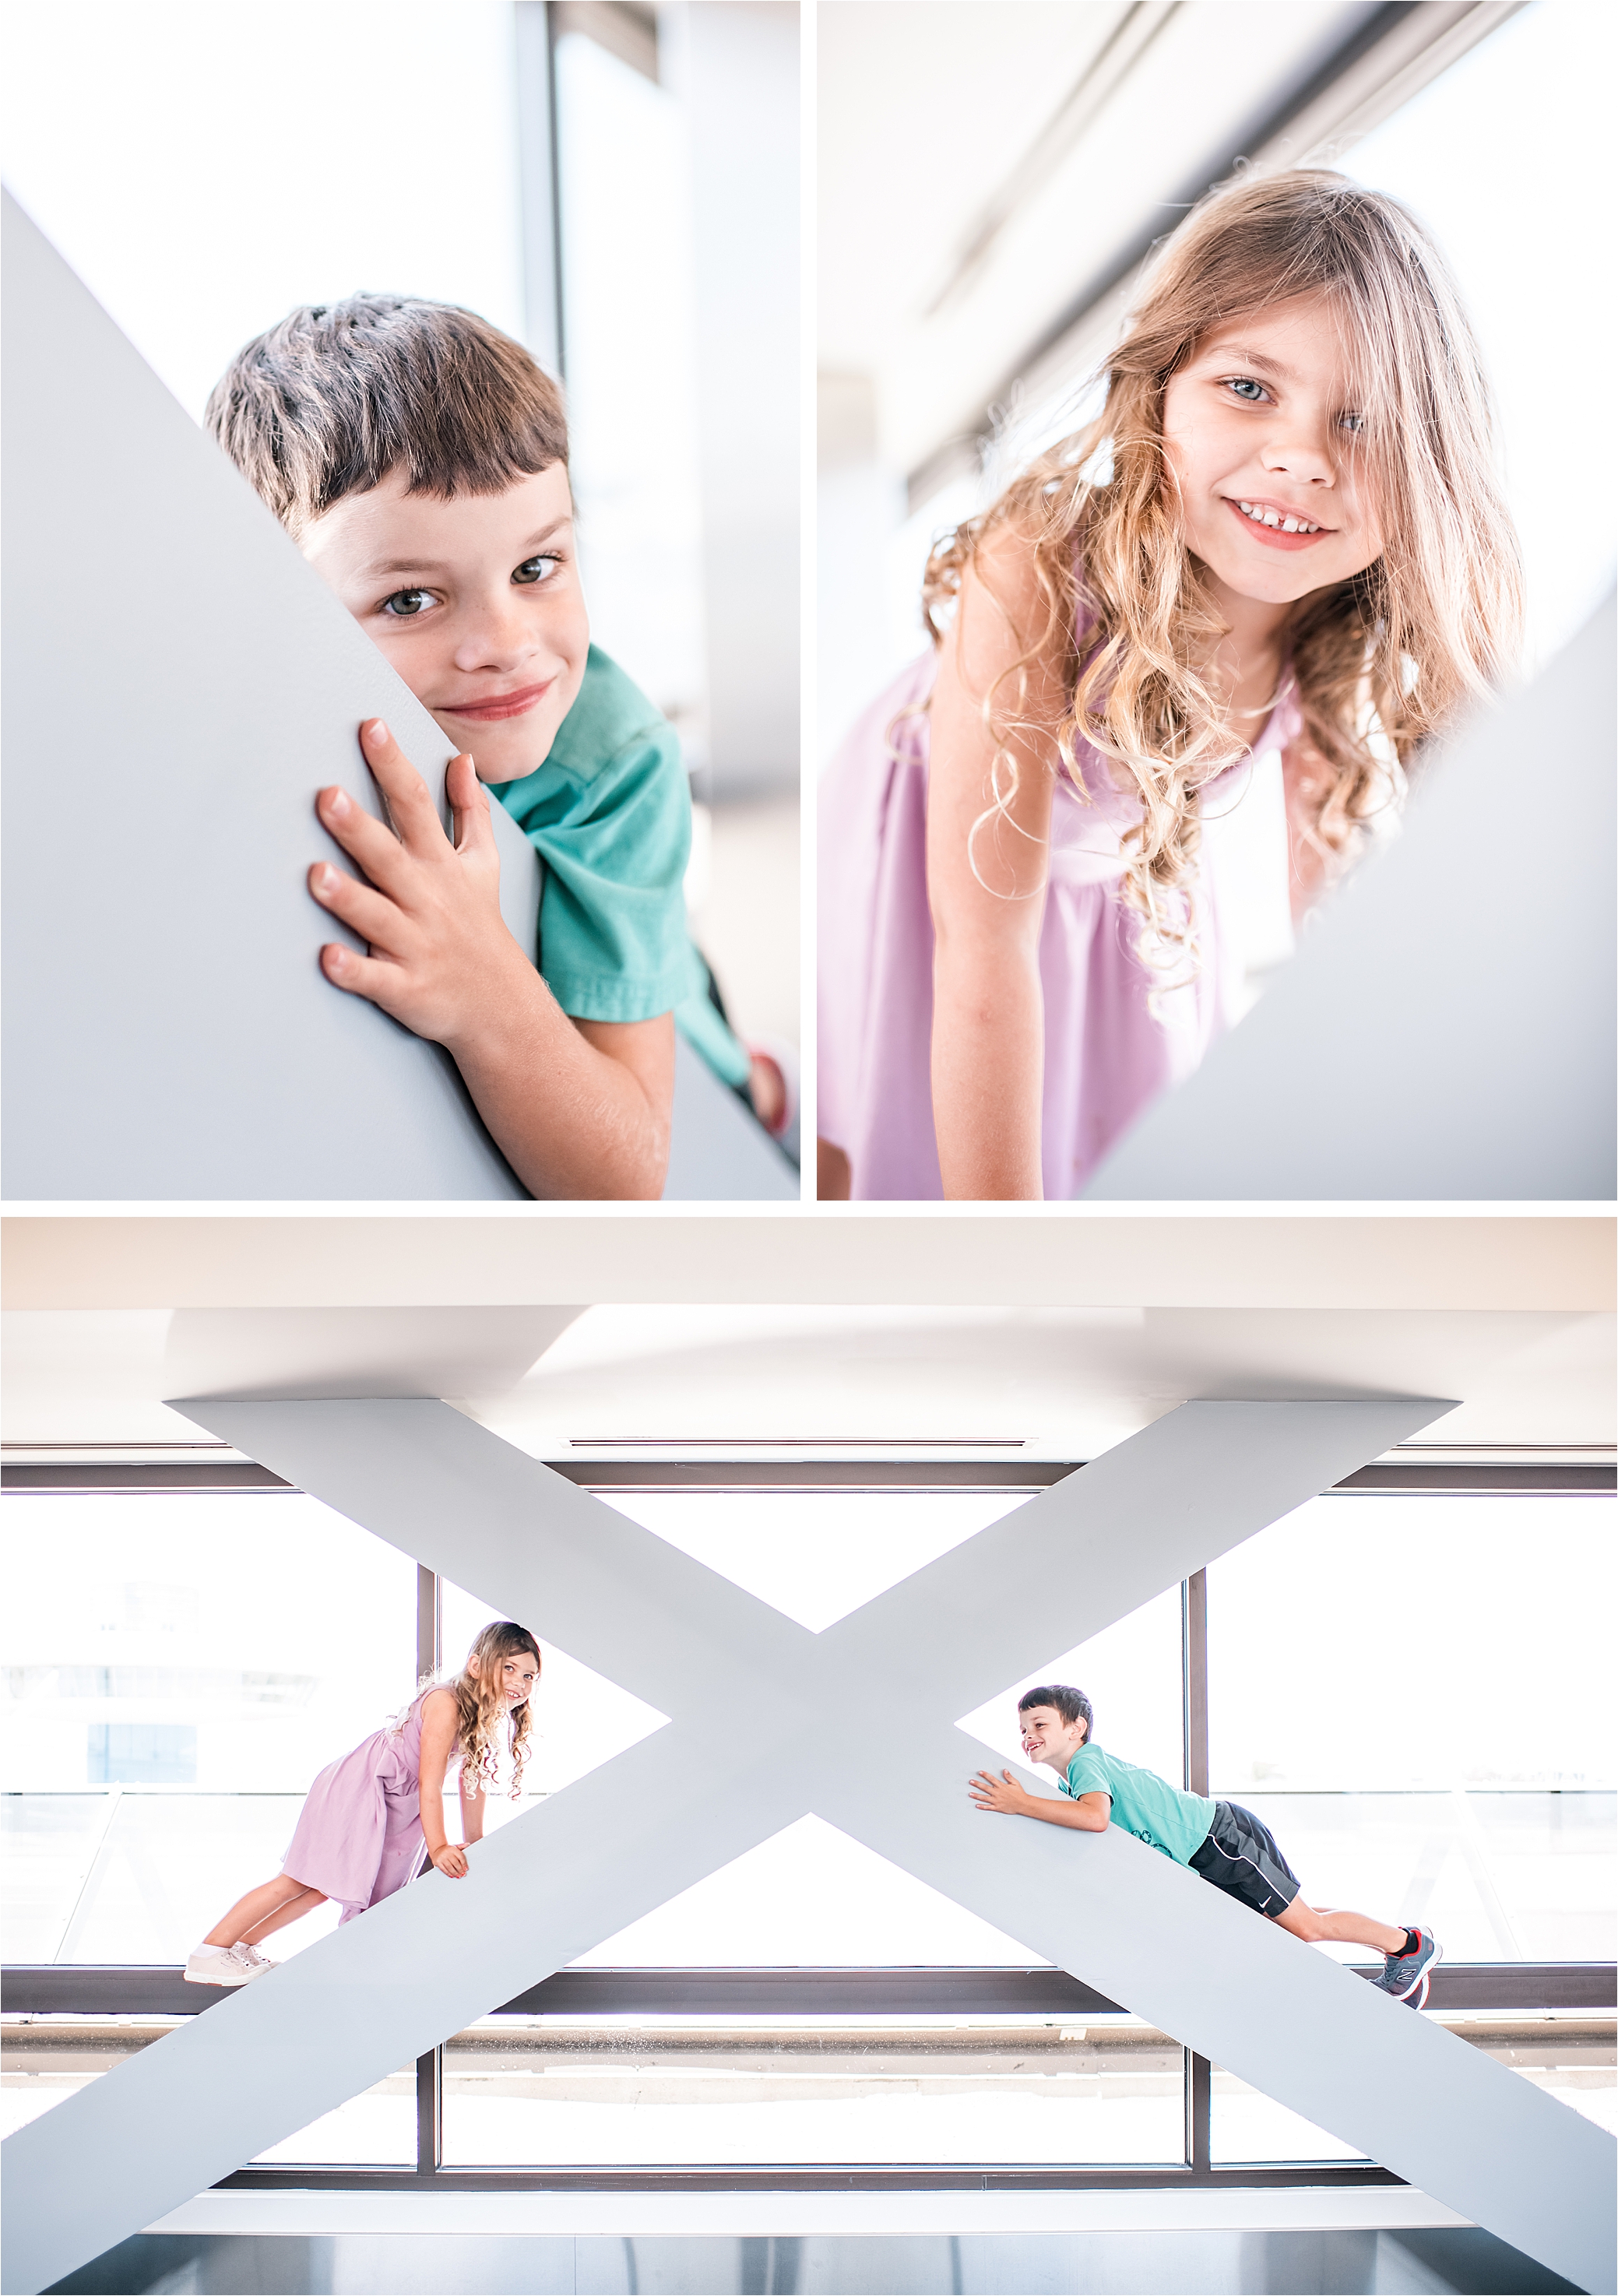 Portraits of children at the airport